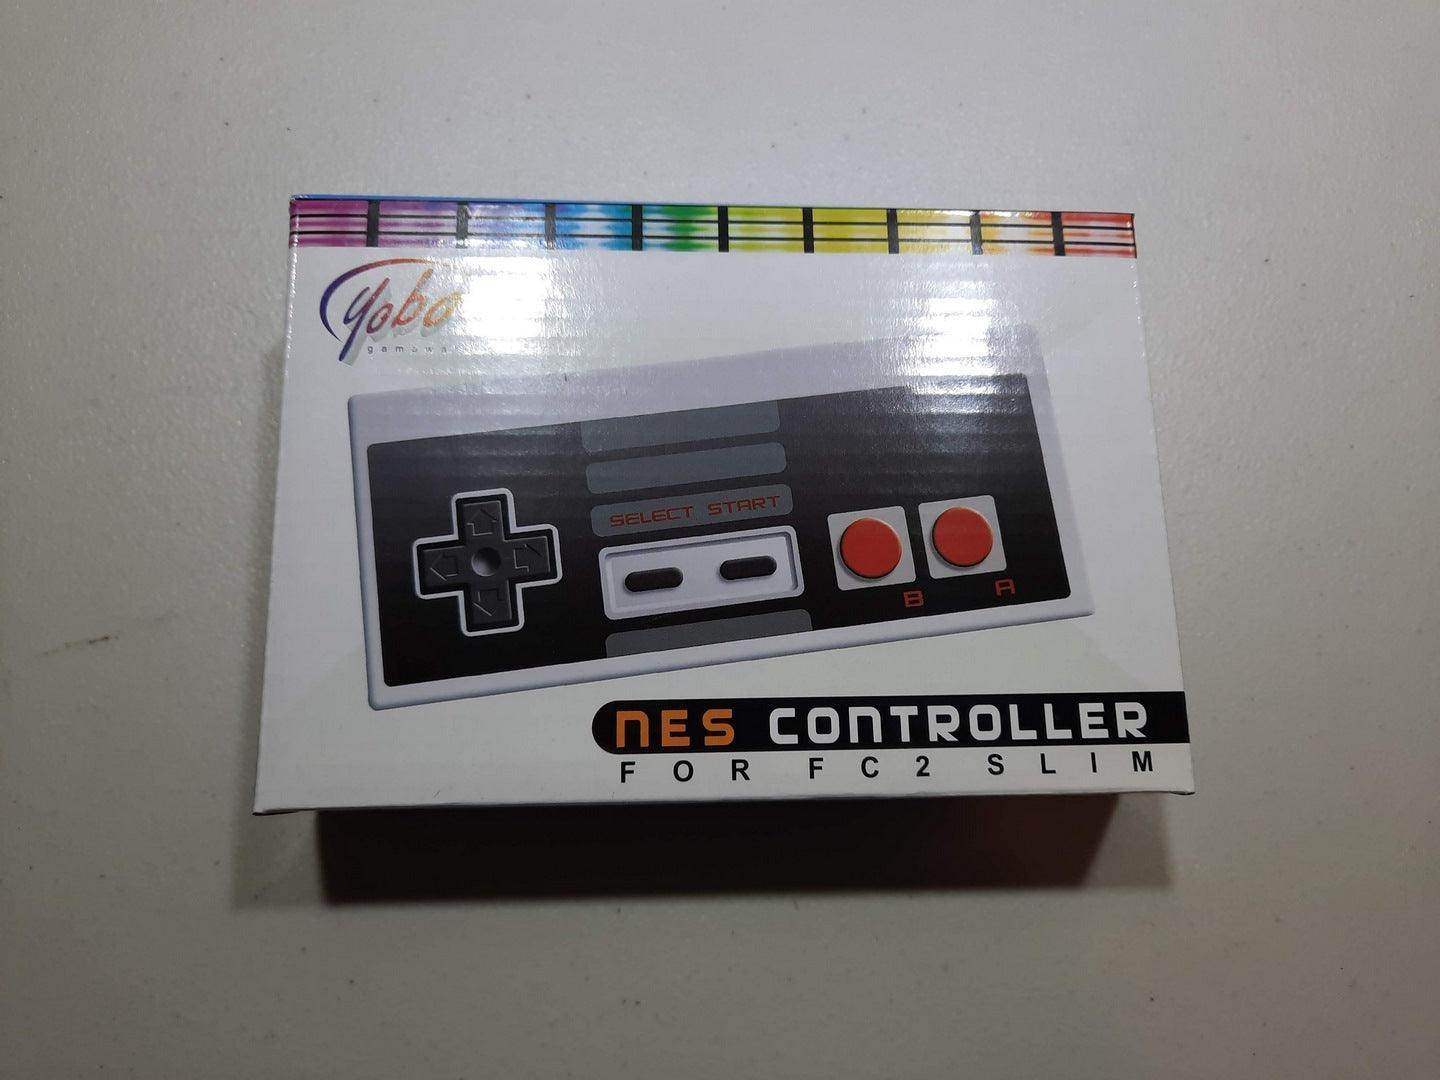 Yobo New Contoller For NES - Jeux Video Hobby 